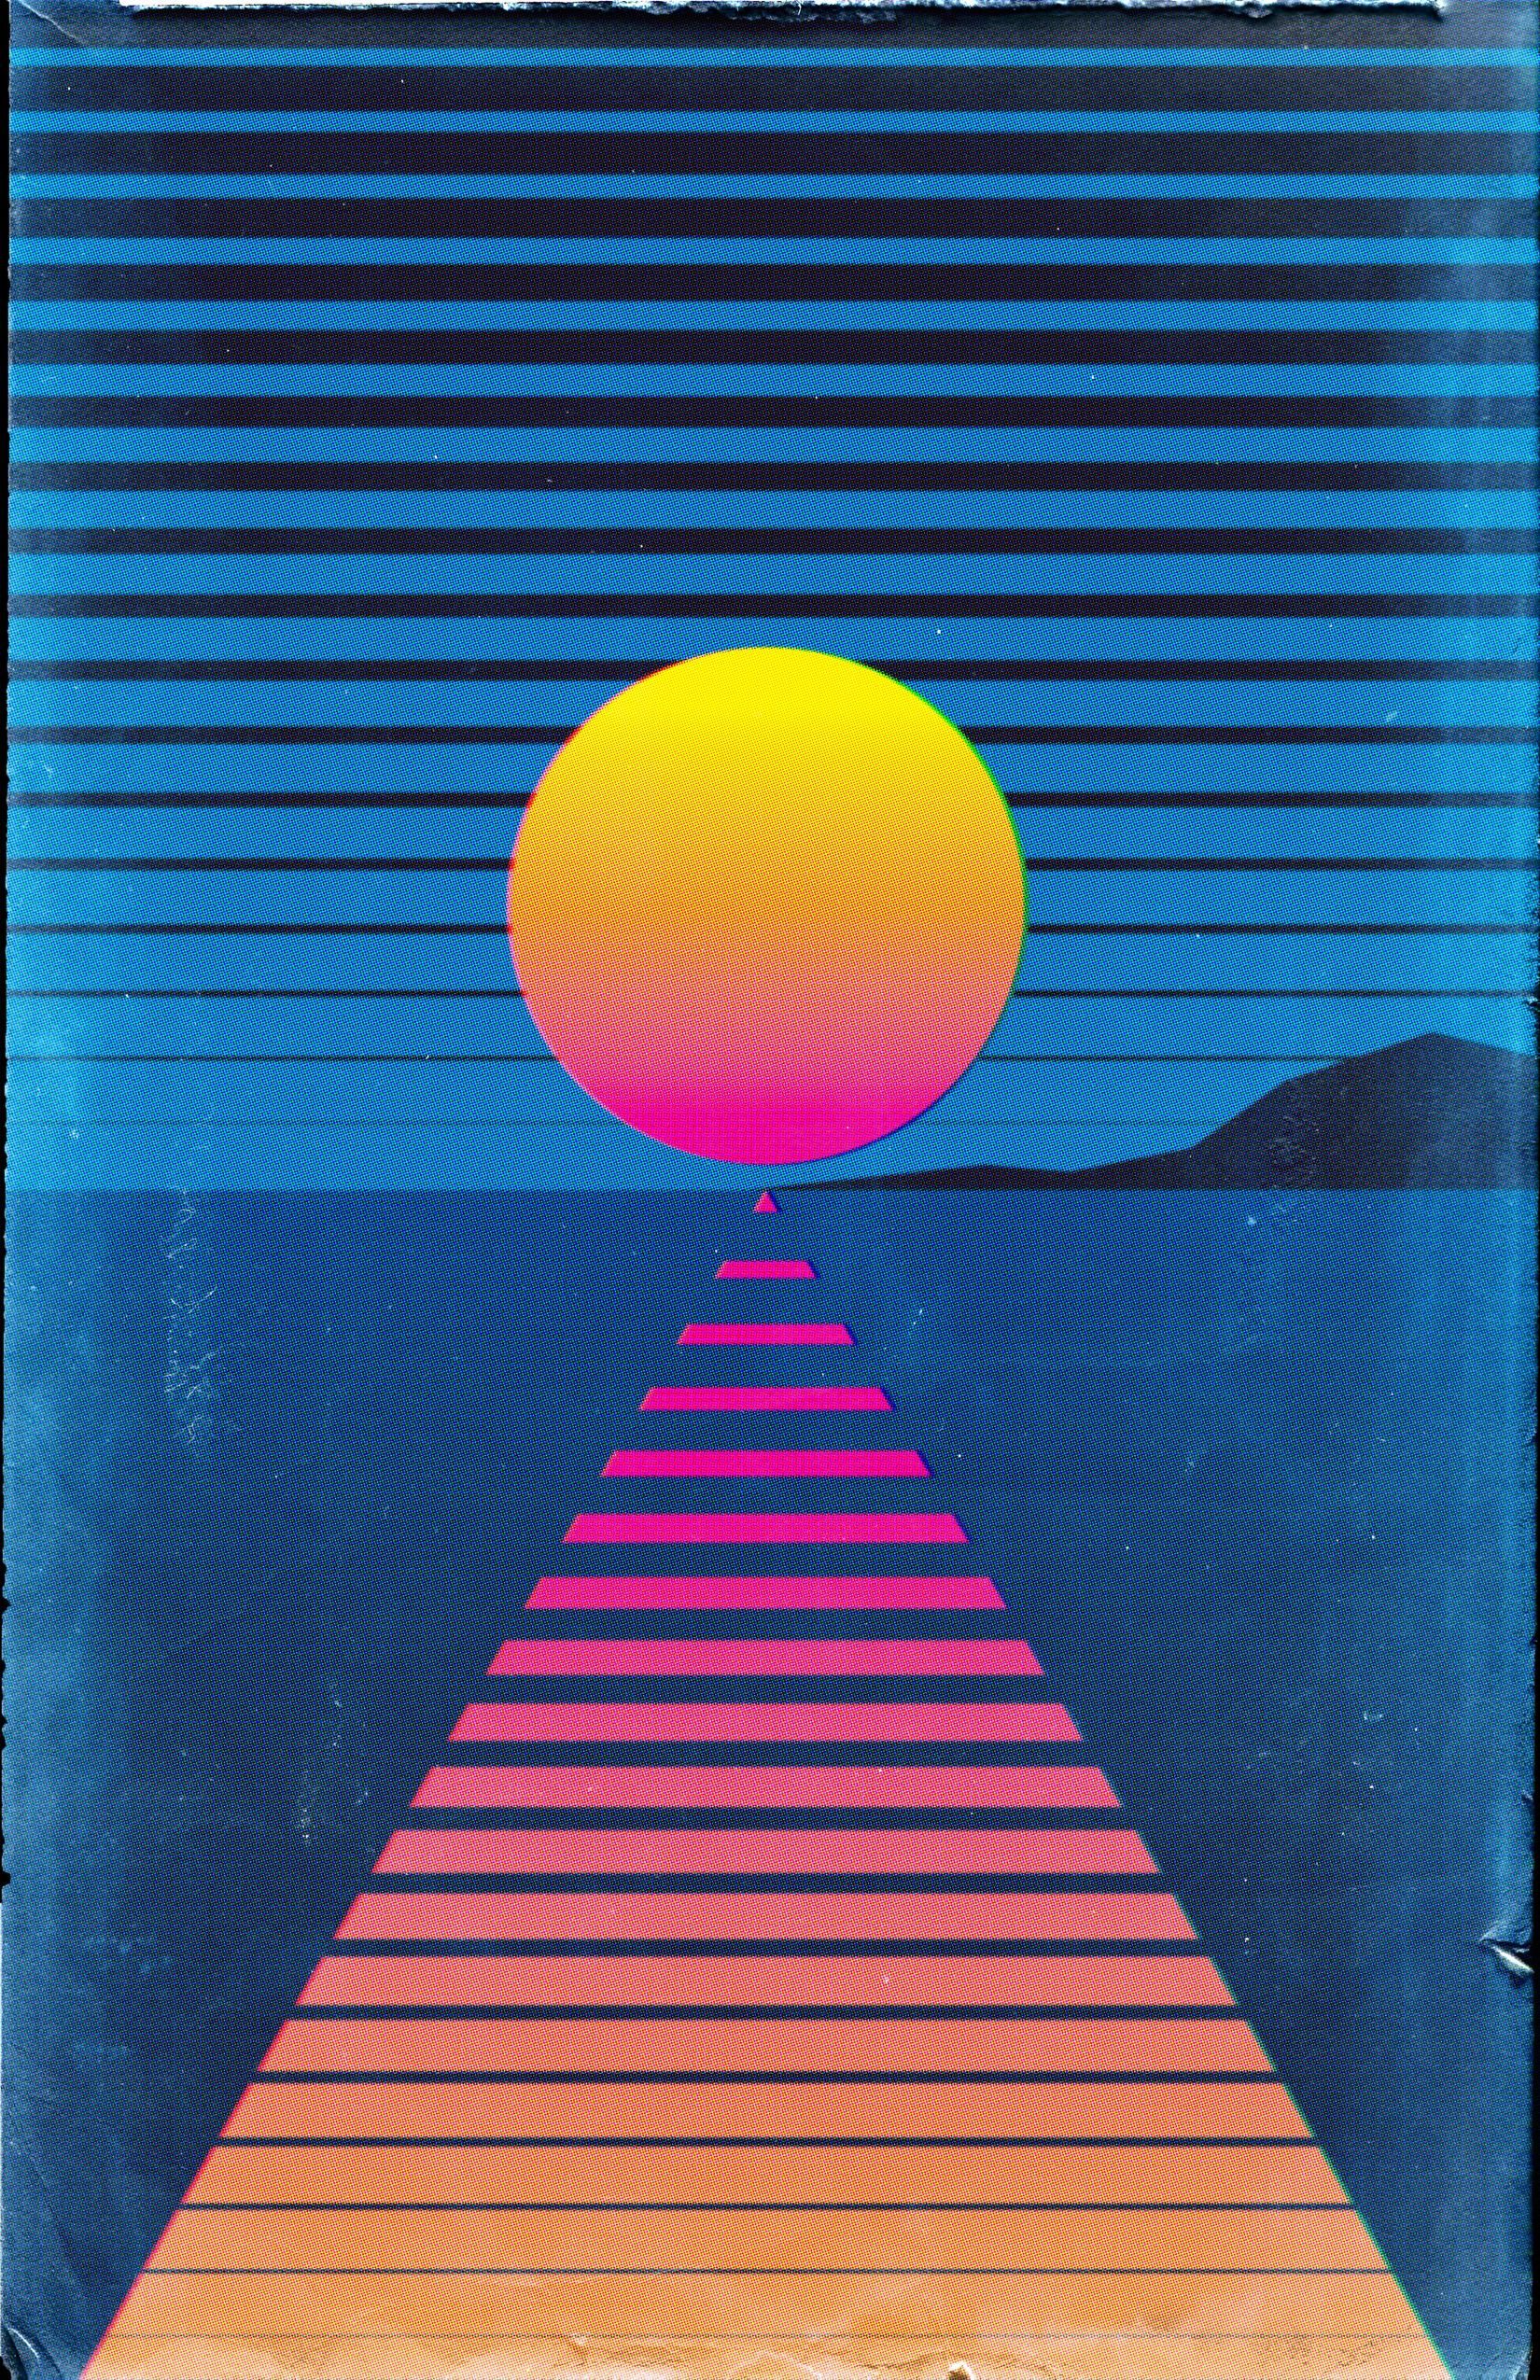 Quick Retrowave Poster #outrun. Wallpaper iphone neon, Wallpaper iphone christmas, iPhone wallpaper vintage